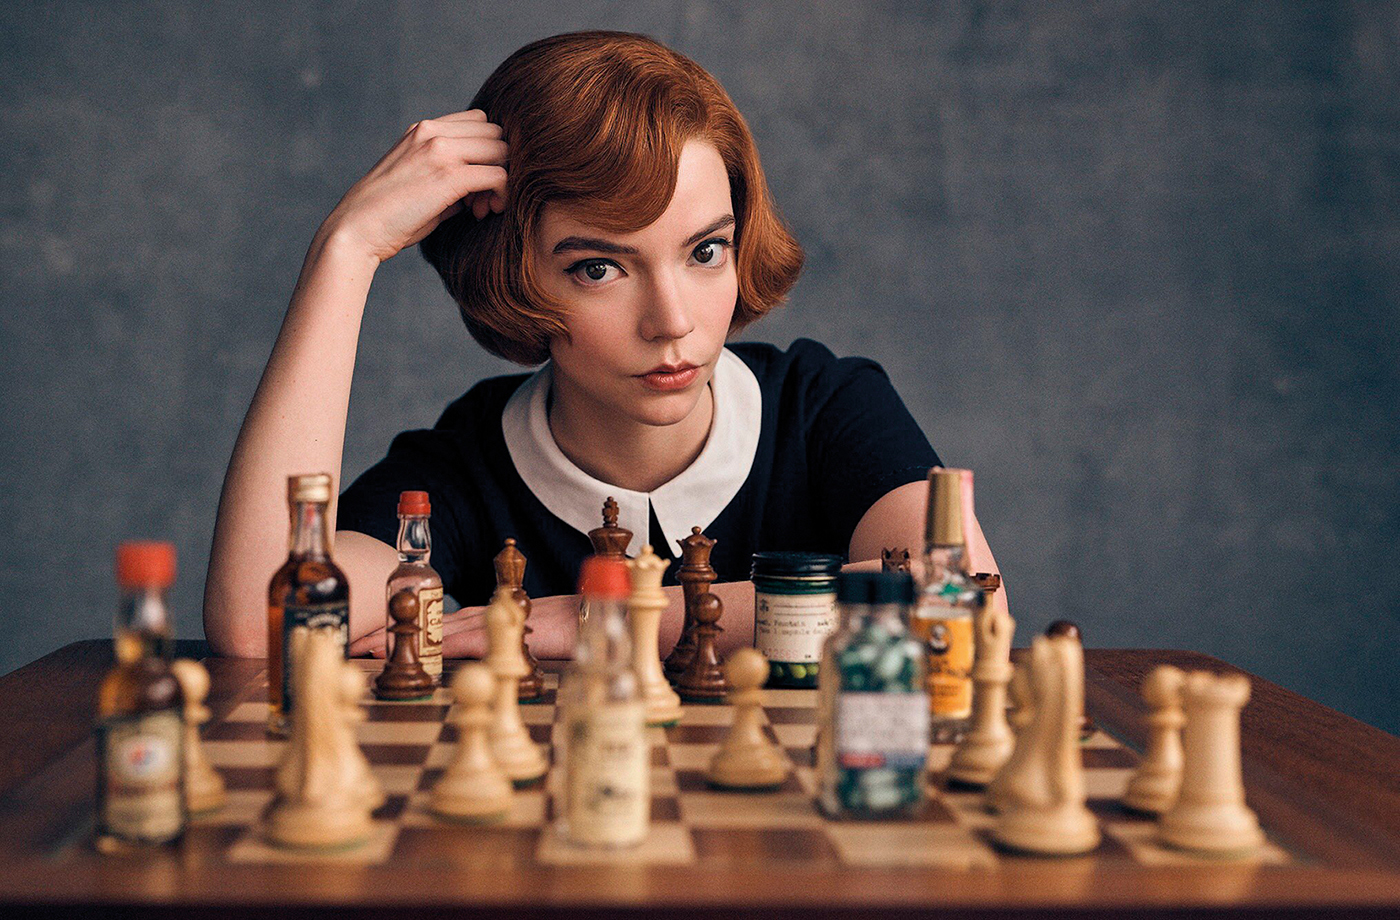 The Queen's Gambit 👑♟️👩🏻‍🦰 on X: The @ChessClubLive Chess